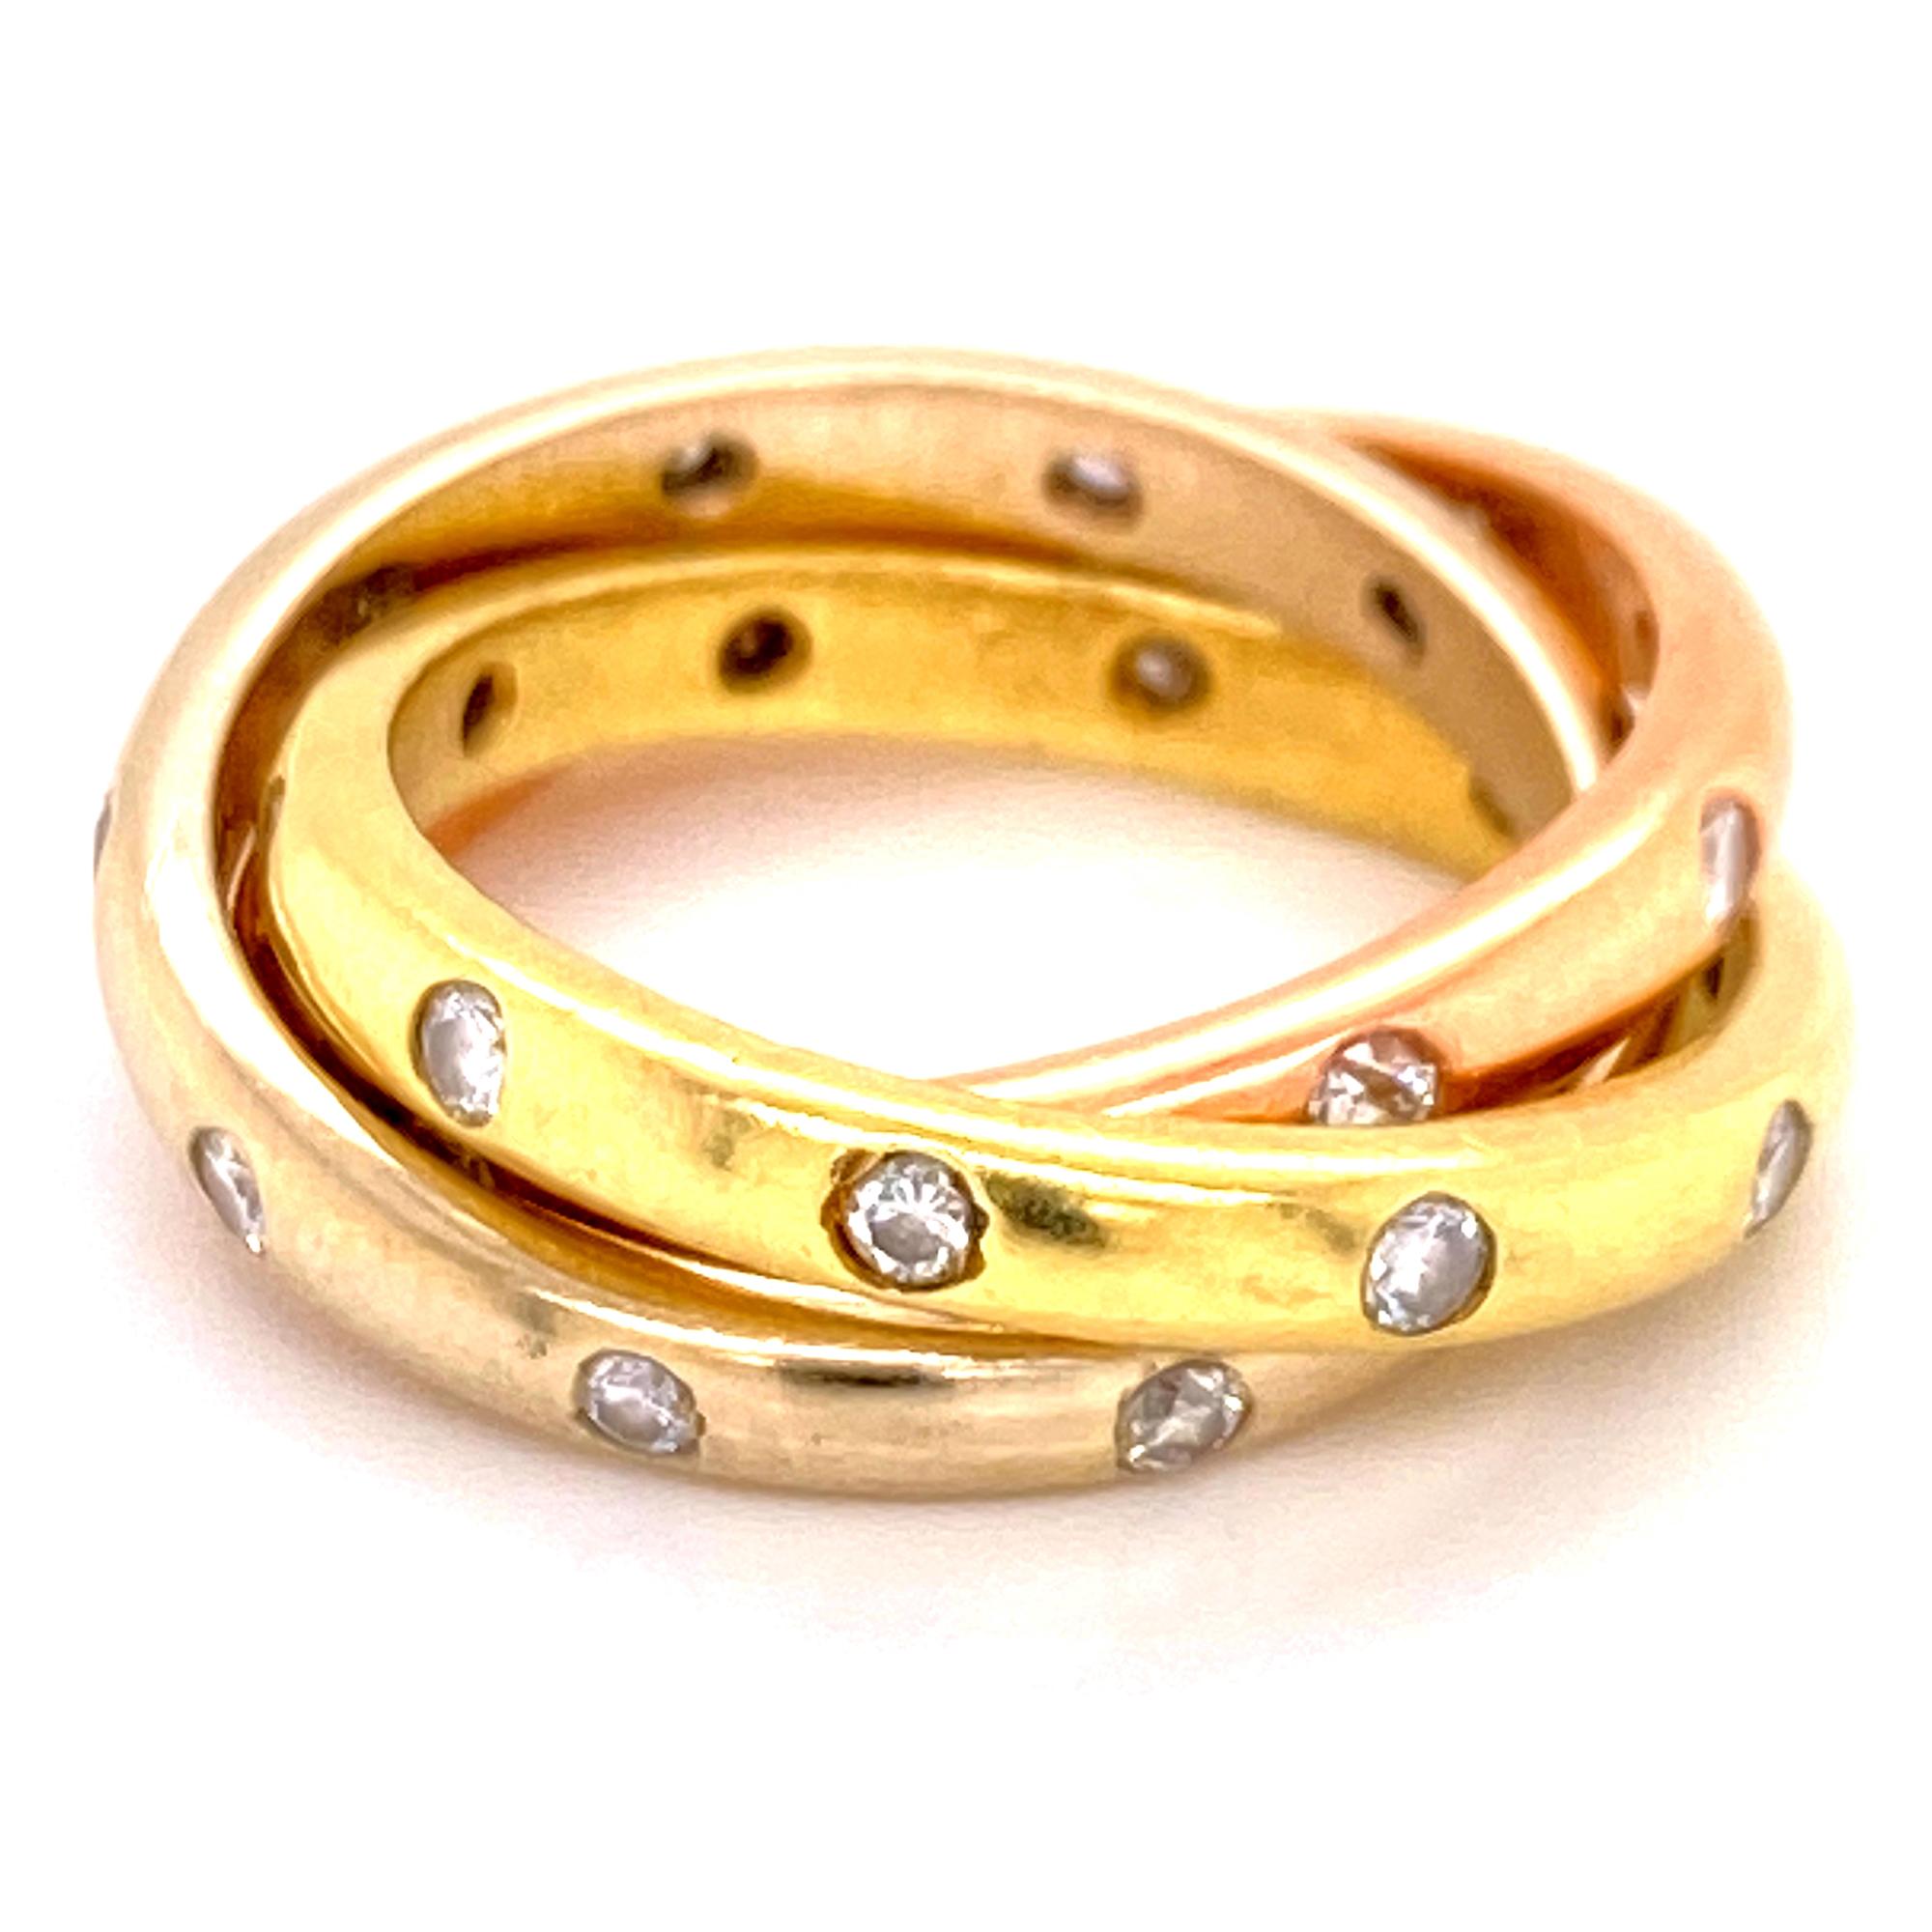 Diamond rolling ring fashioned in 18 karat tricolor gold. The three intertwined bands feature round brilliant cut diamonds weighing .60 carat total weight. Each band measures 3mm in width, and is size 5.5. 